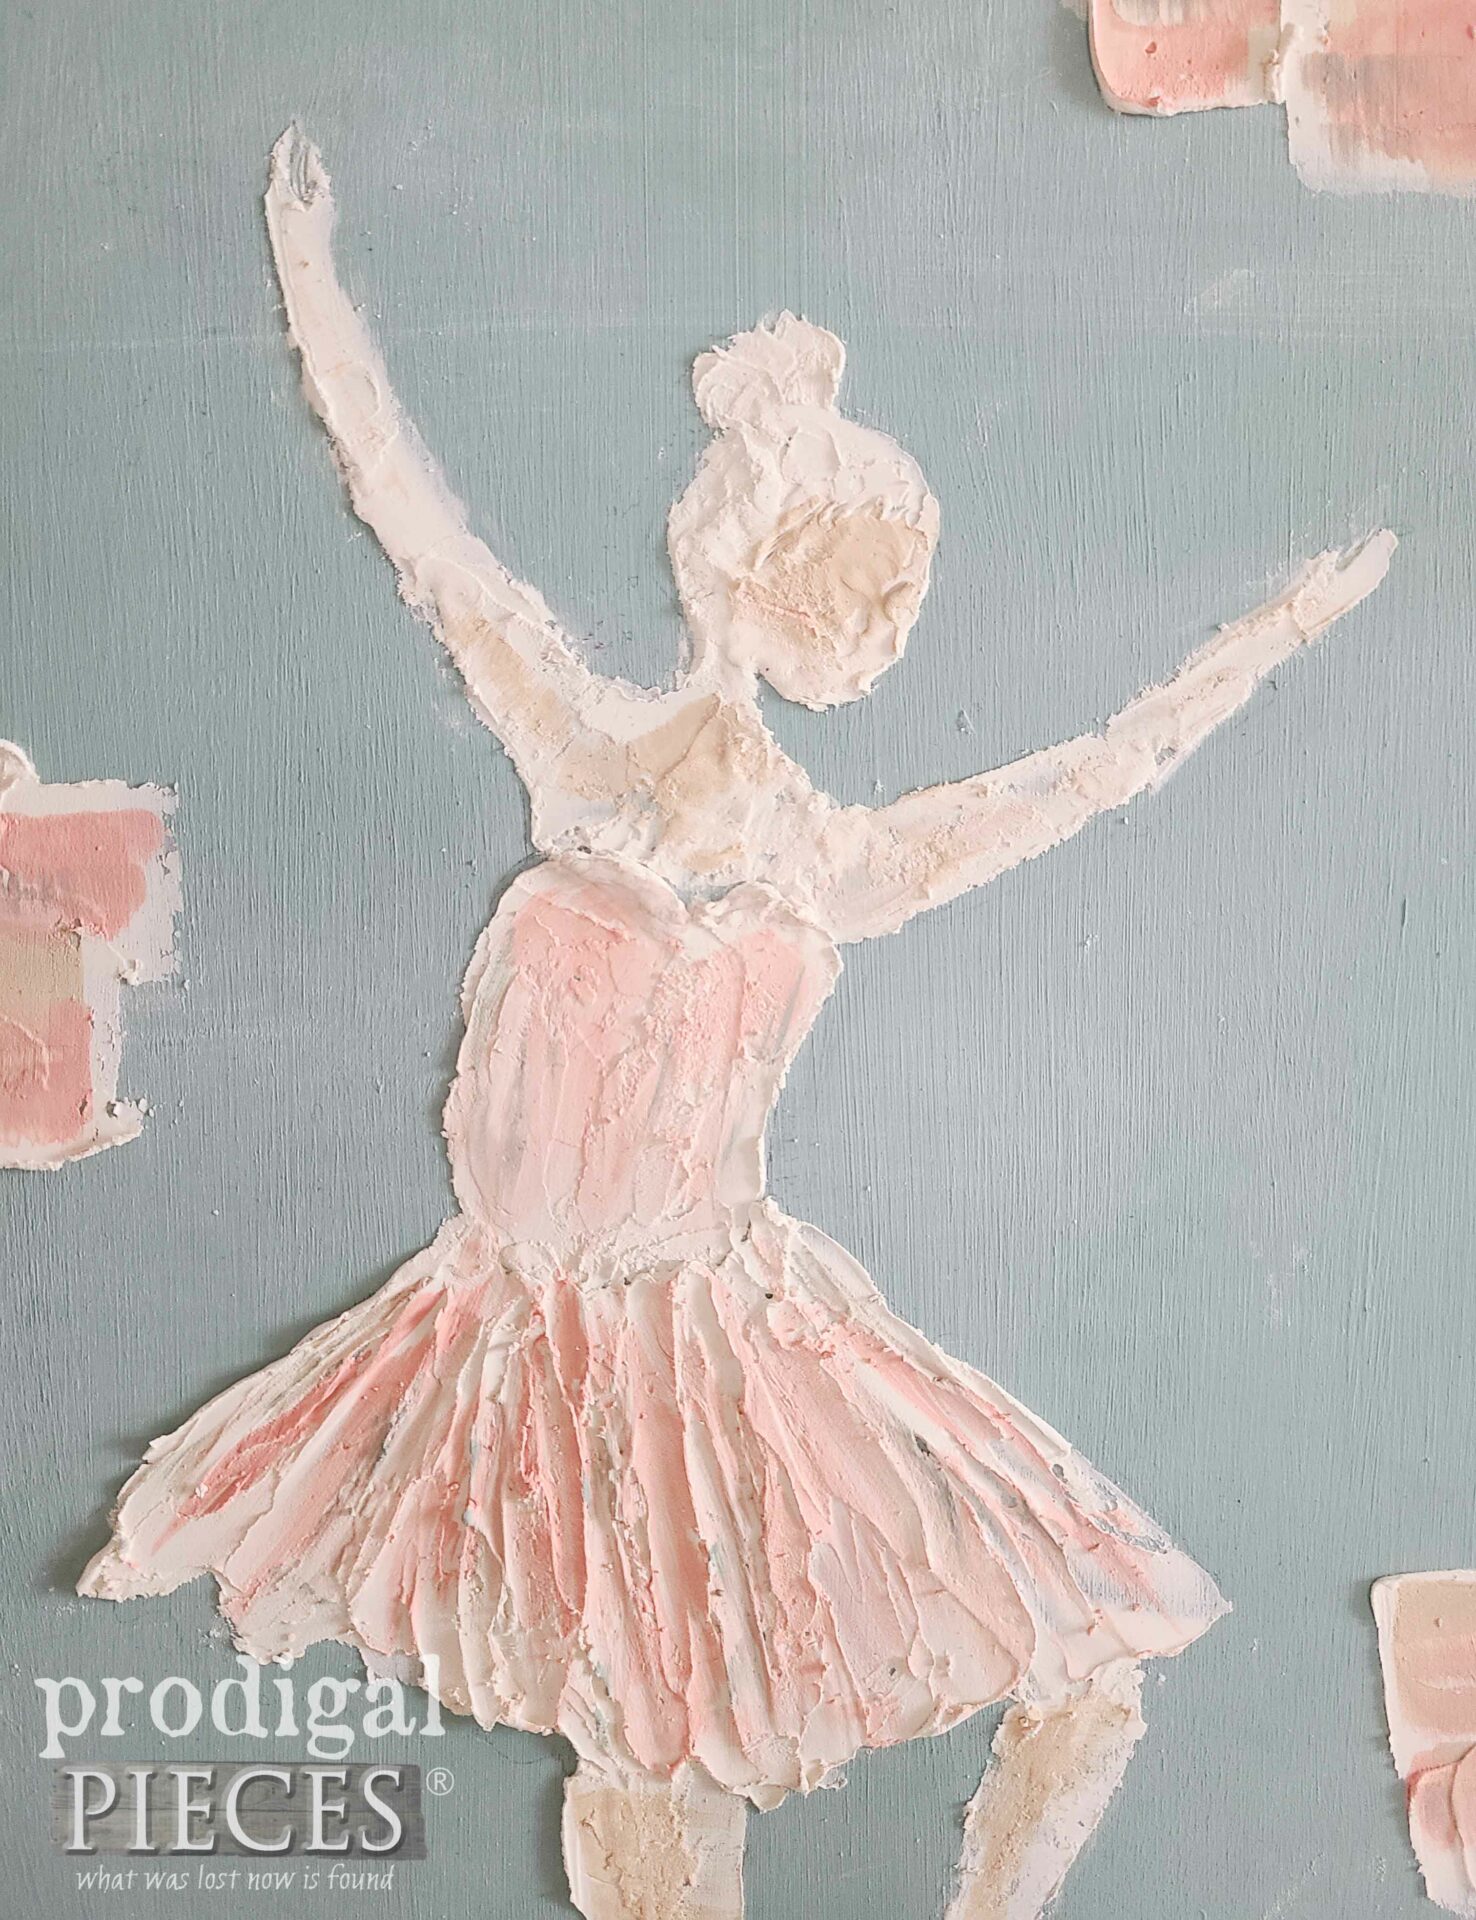 DIY Spackling Ballerina for Thrifted Art Makeover by Larissa of Prodigal Pieces | prodigalpieces.com #prodigalpieces